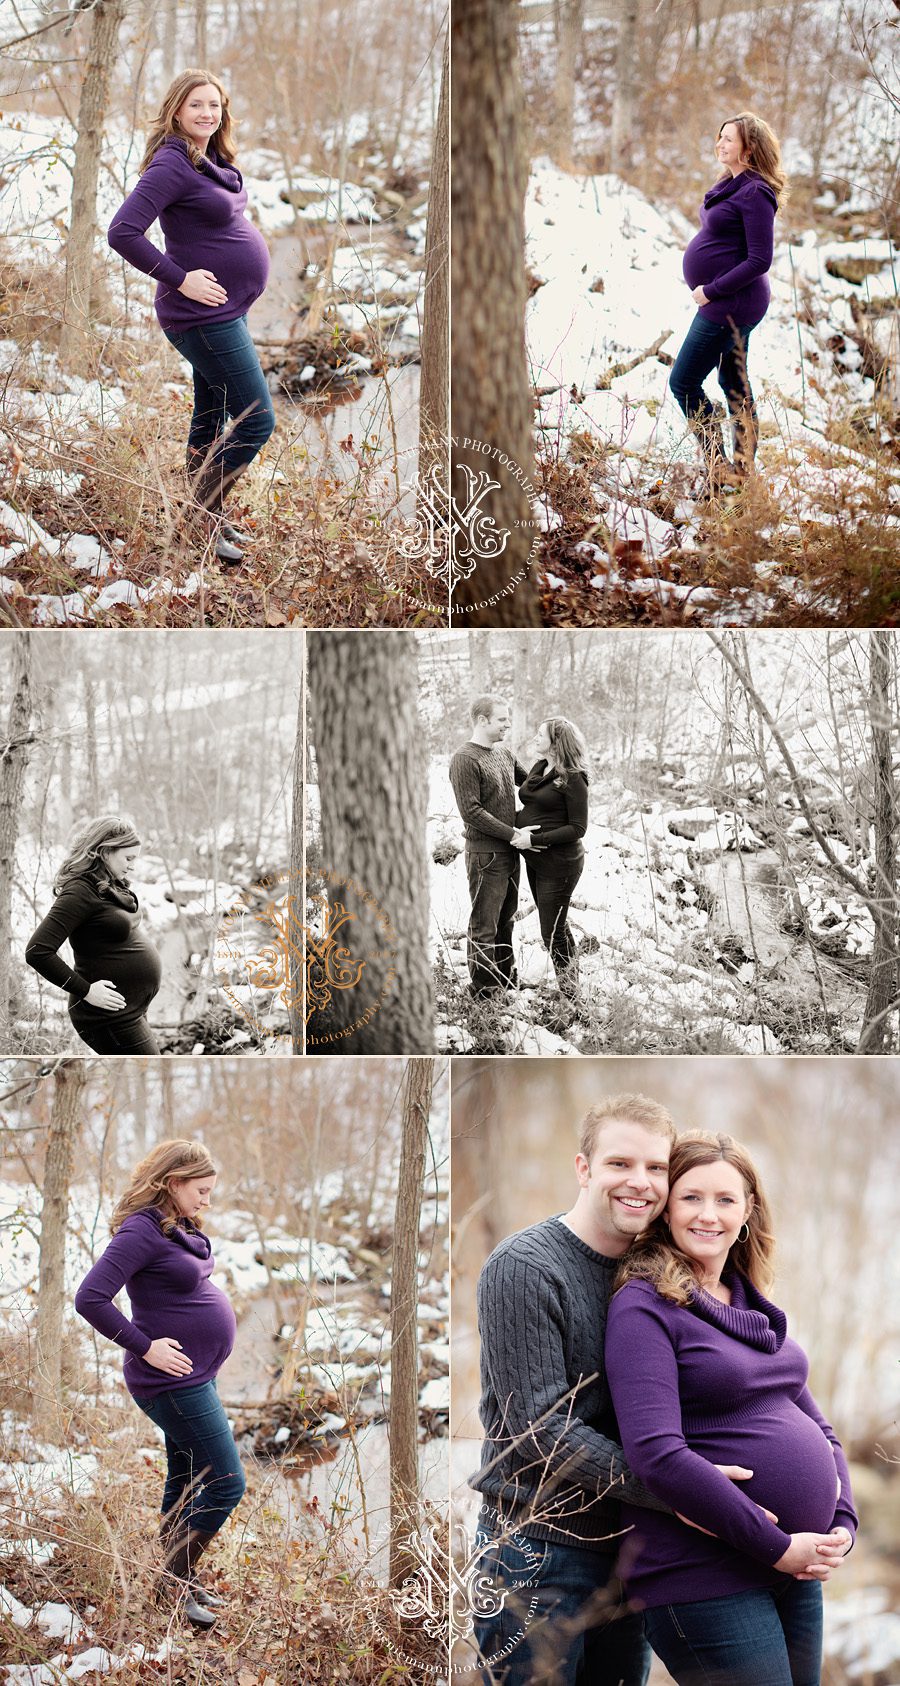 St. Louis Maternity Photographer produces portraits for family expecting first baby at their home in Wentzville, MO.